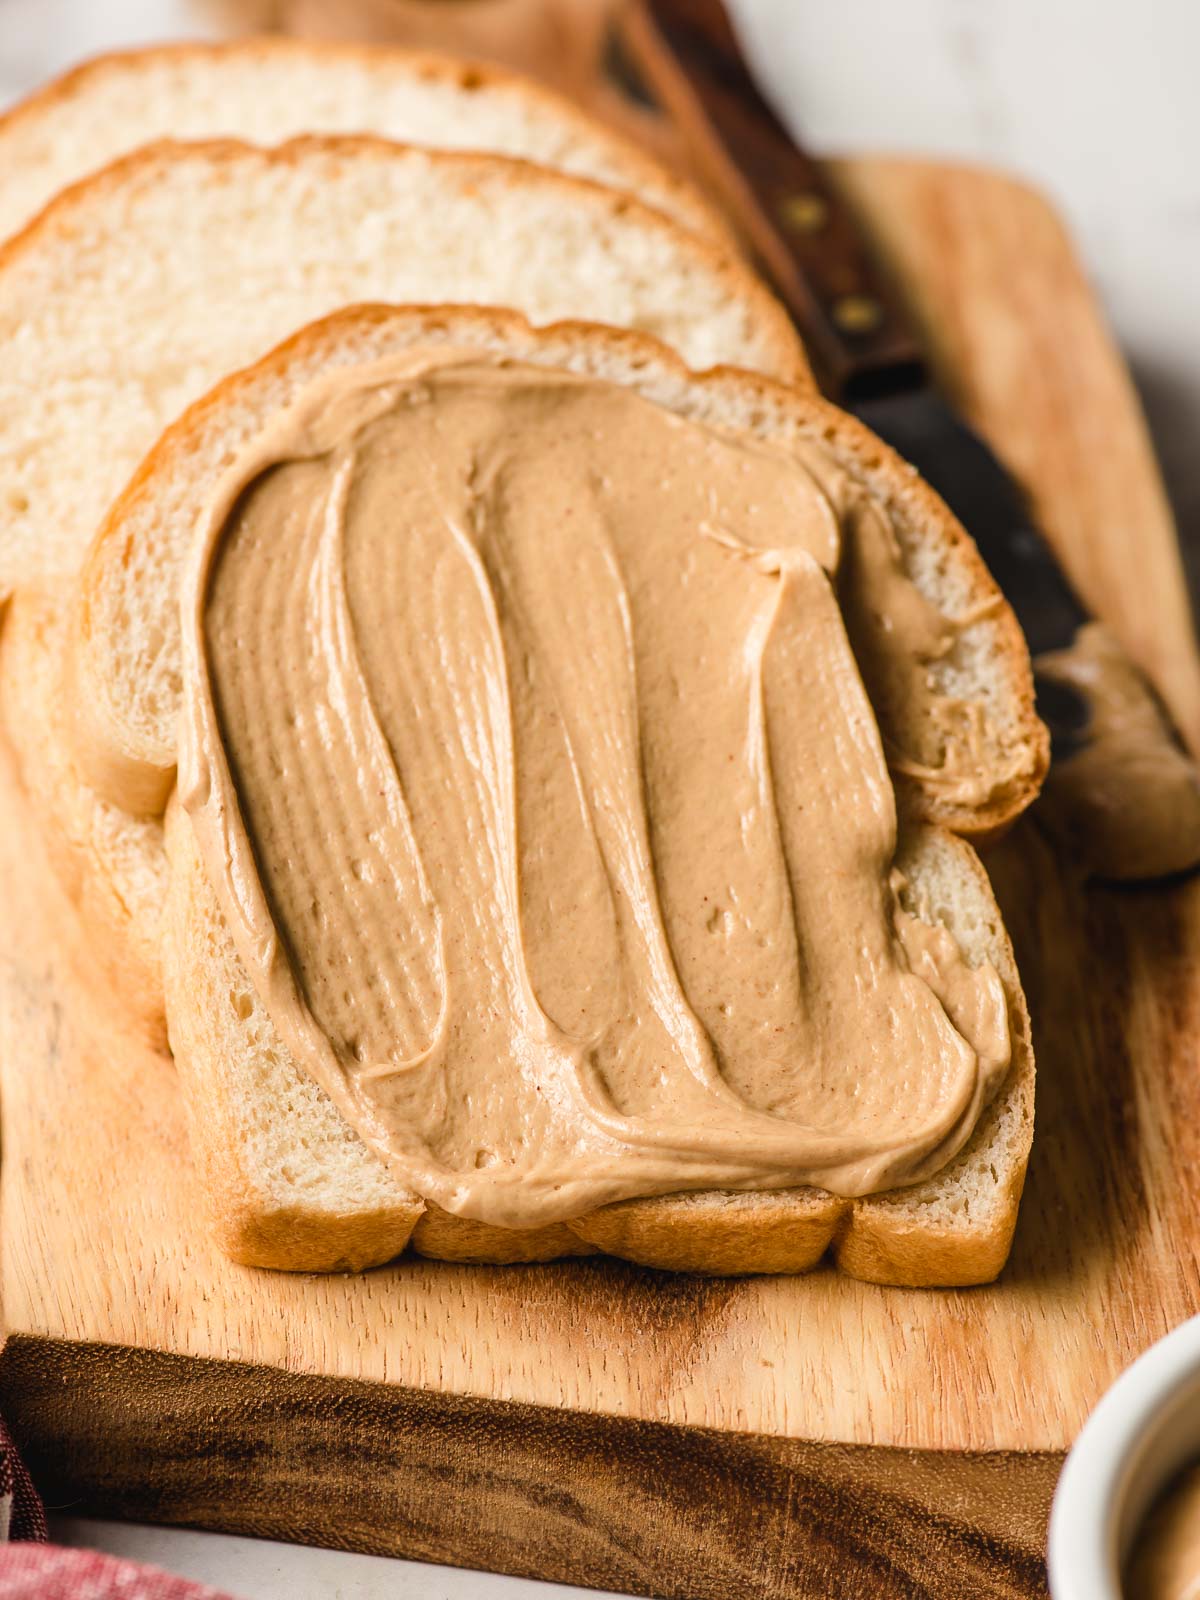 Slice of white bread with Amish peanut butter spread.